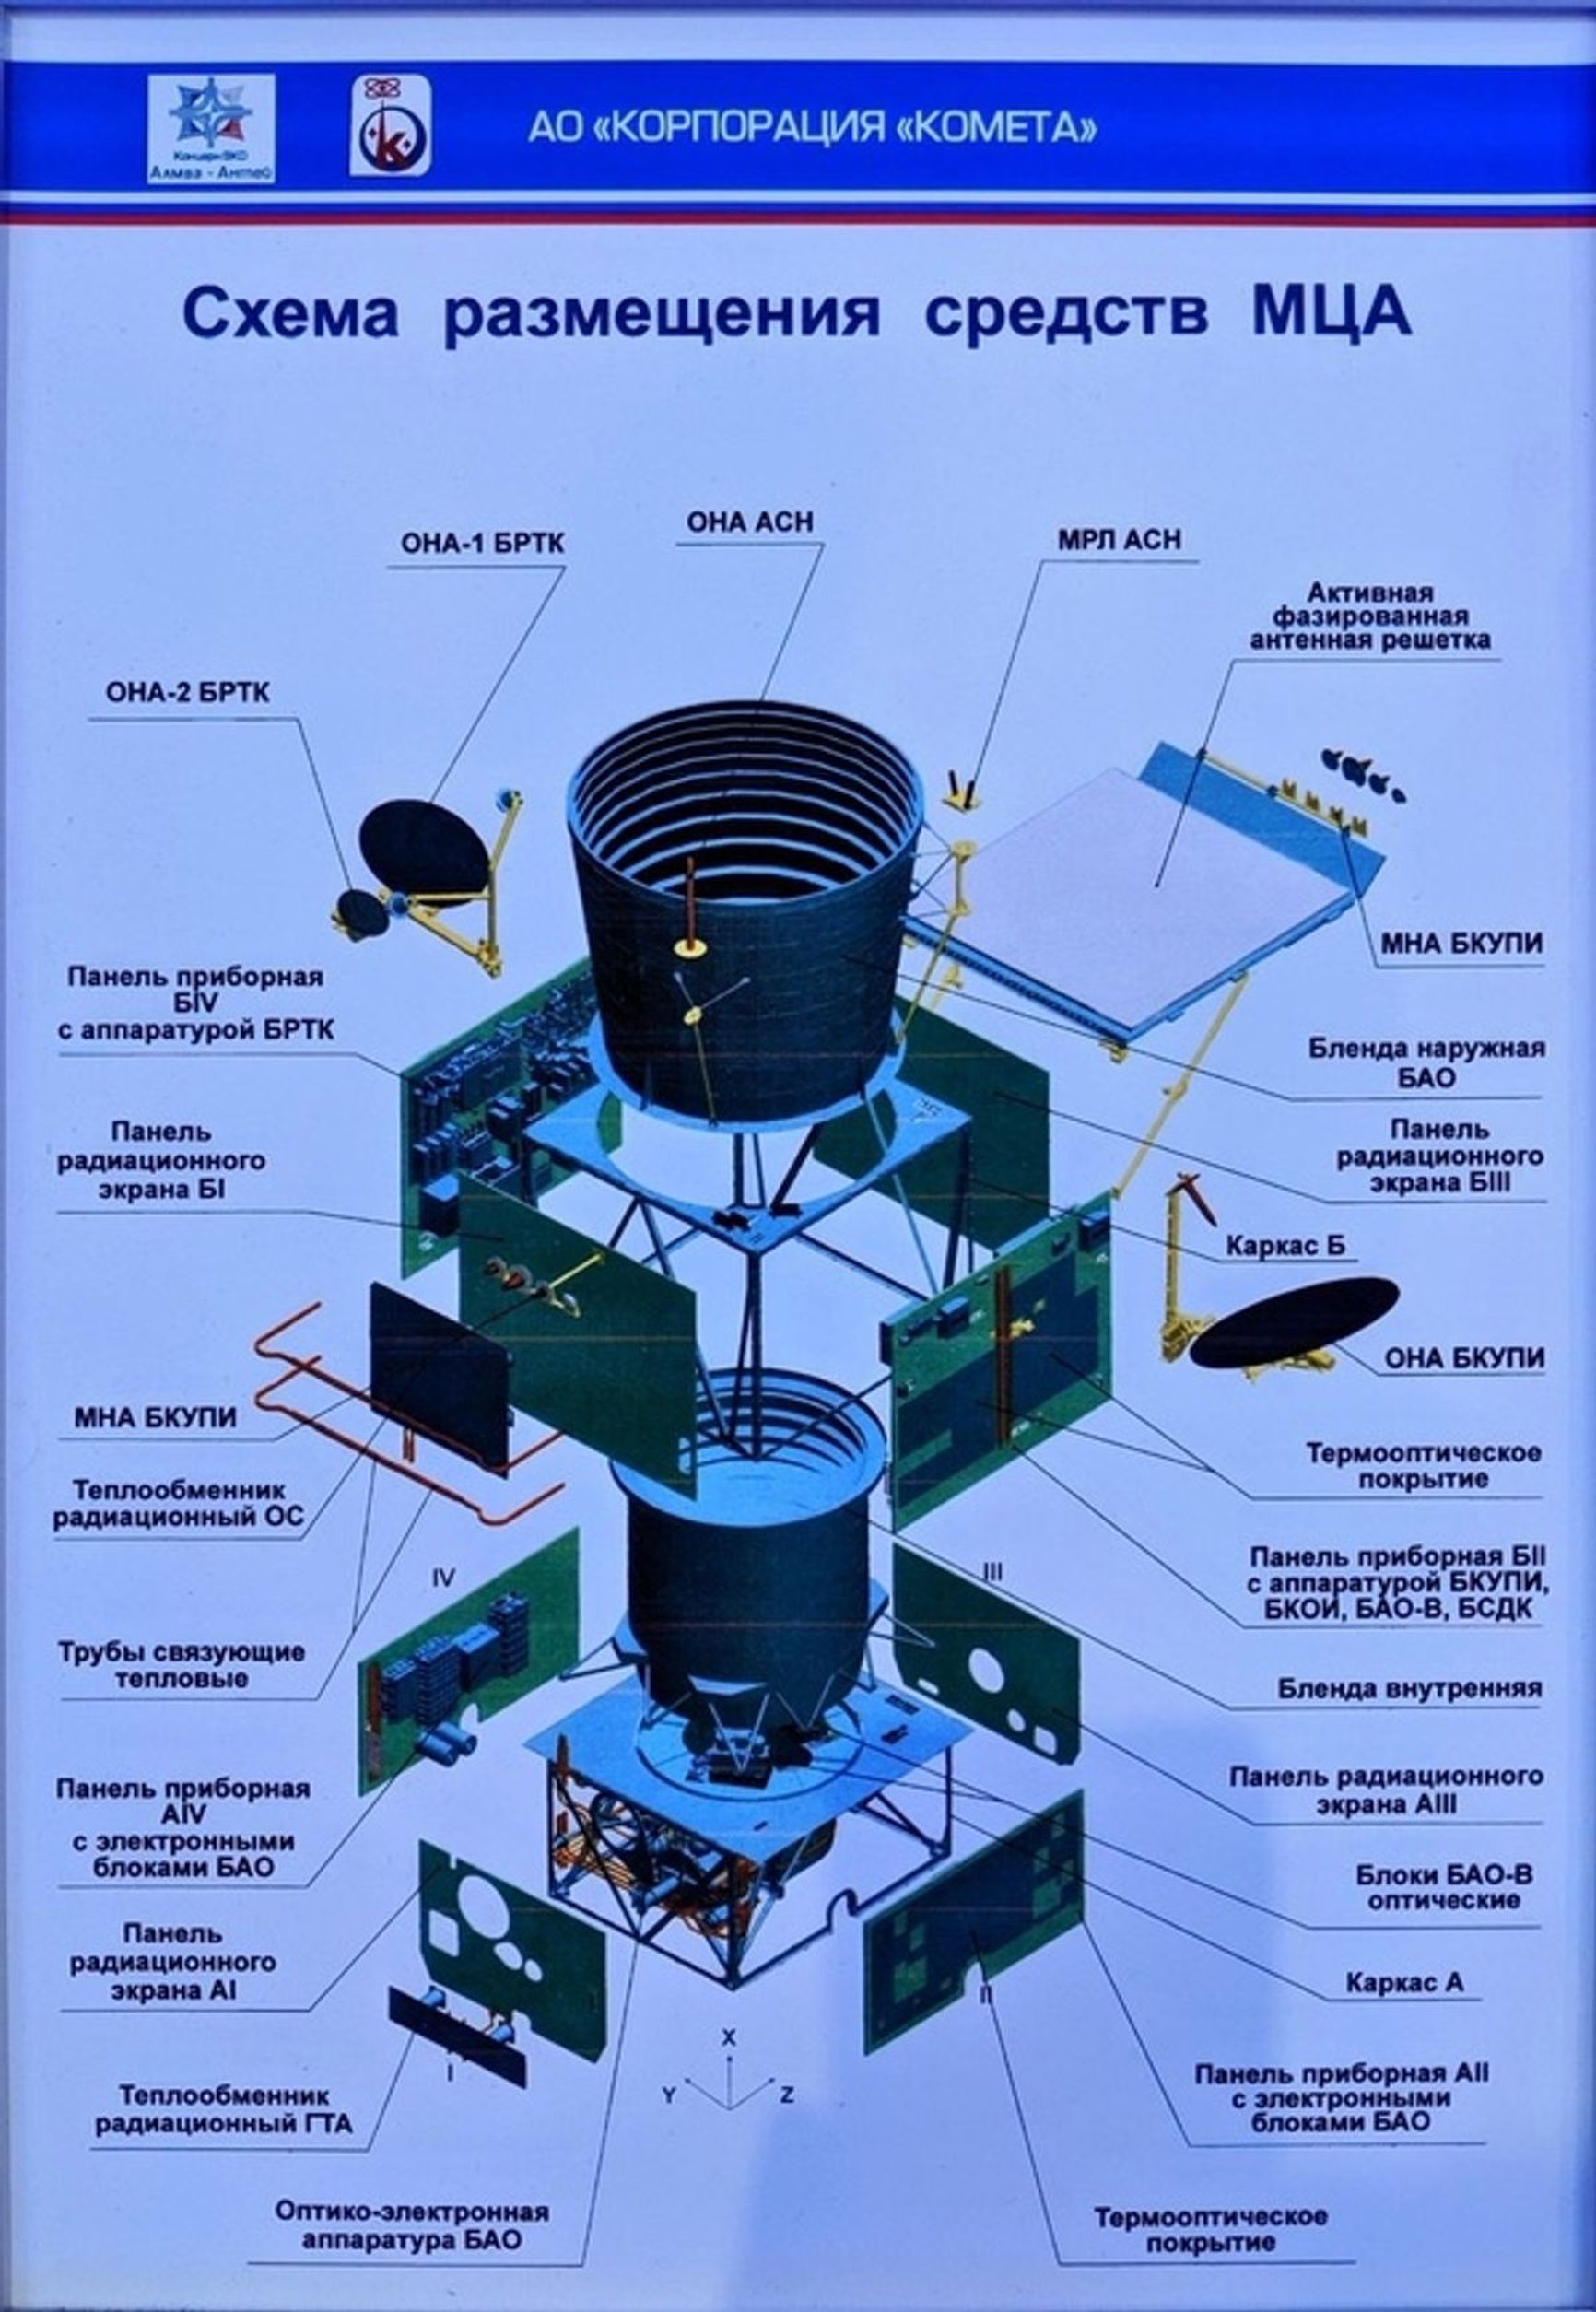 Design of the payload module of the Tundra satellite